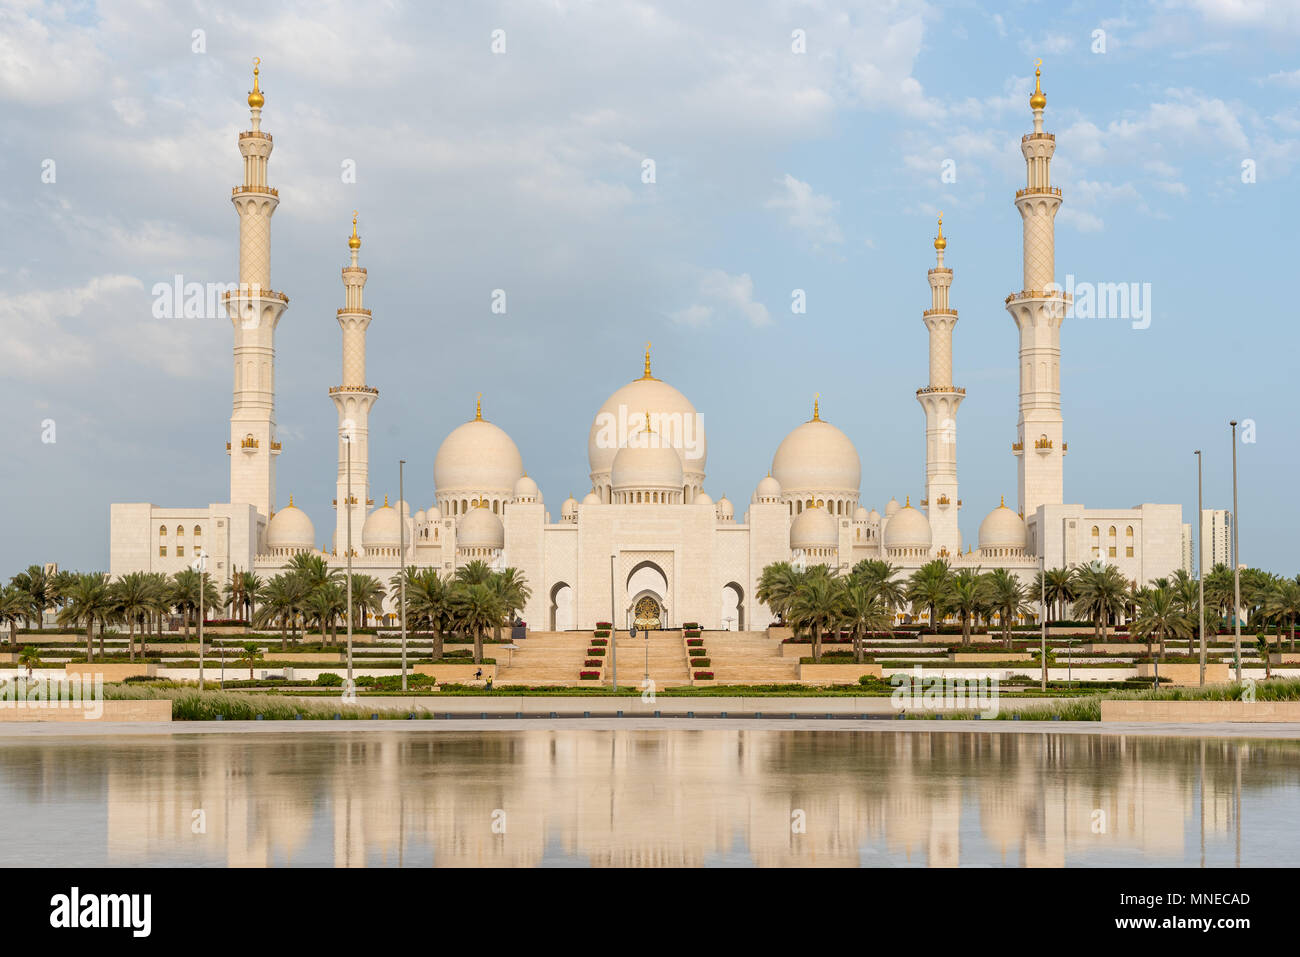 Abu Dhabi, United Arab Emirates. 17, May, 2018.  Sunrise at Sheikh Zayed Grand Mosque in Abu Dhabi, capital city of the United Arab Emirates, on the first day of Ramadan 2018  Mosque is made of white Italian marble and is also home to the final resting place of the Founding Father of the UAE, Zayed bin Sultan Al Nahyan  ©2018 Richard Sharrocks  / Alamy Live News Stock Photo